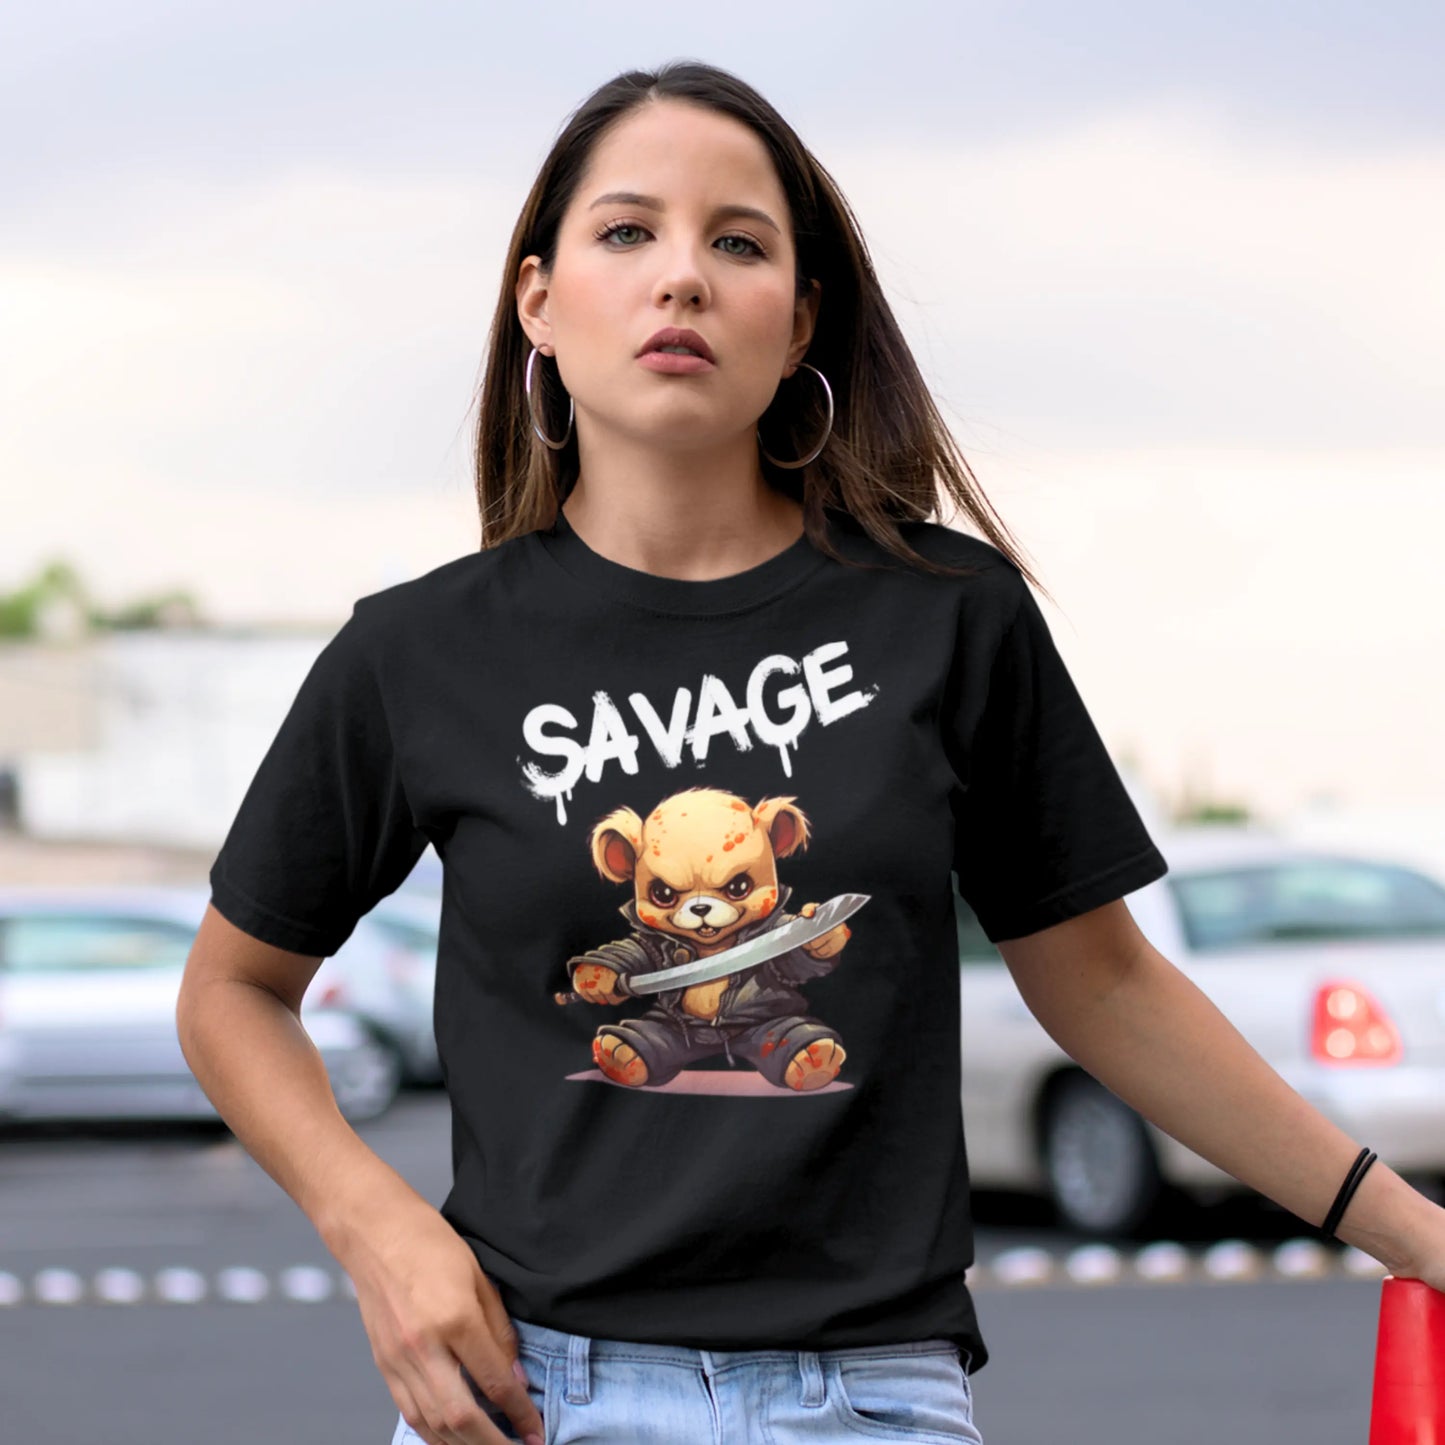 A woman with a focused gaze, wearing a black t-shirt featuring the word 'SAVAGE' above a graphic of an animated bear character wielding a sword.